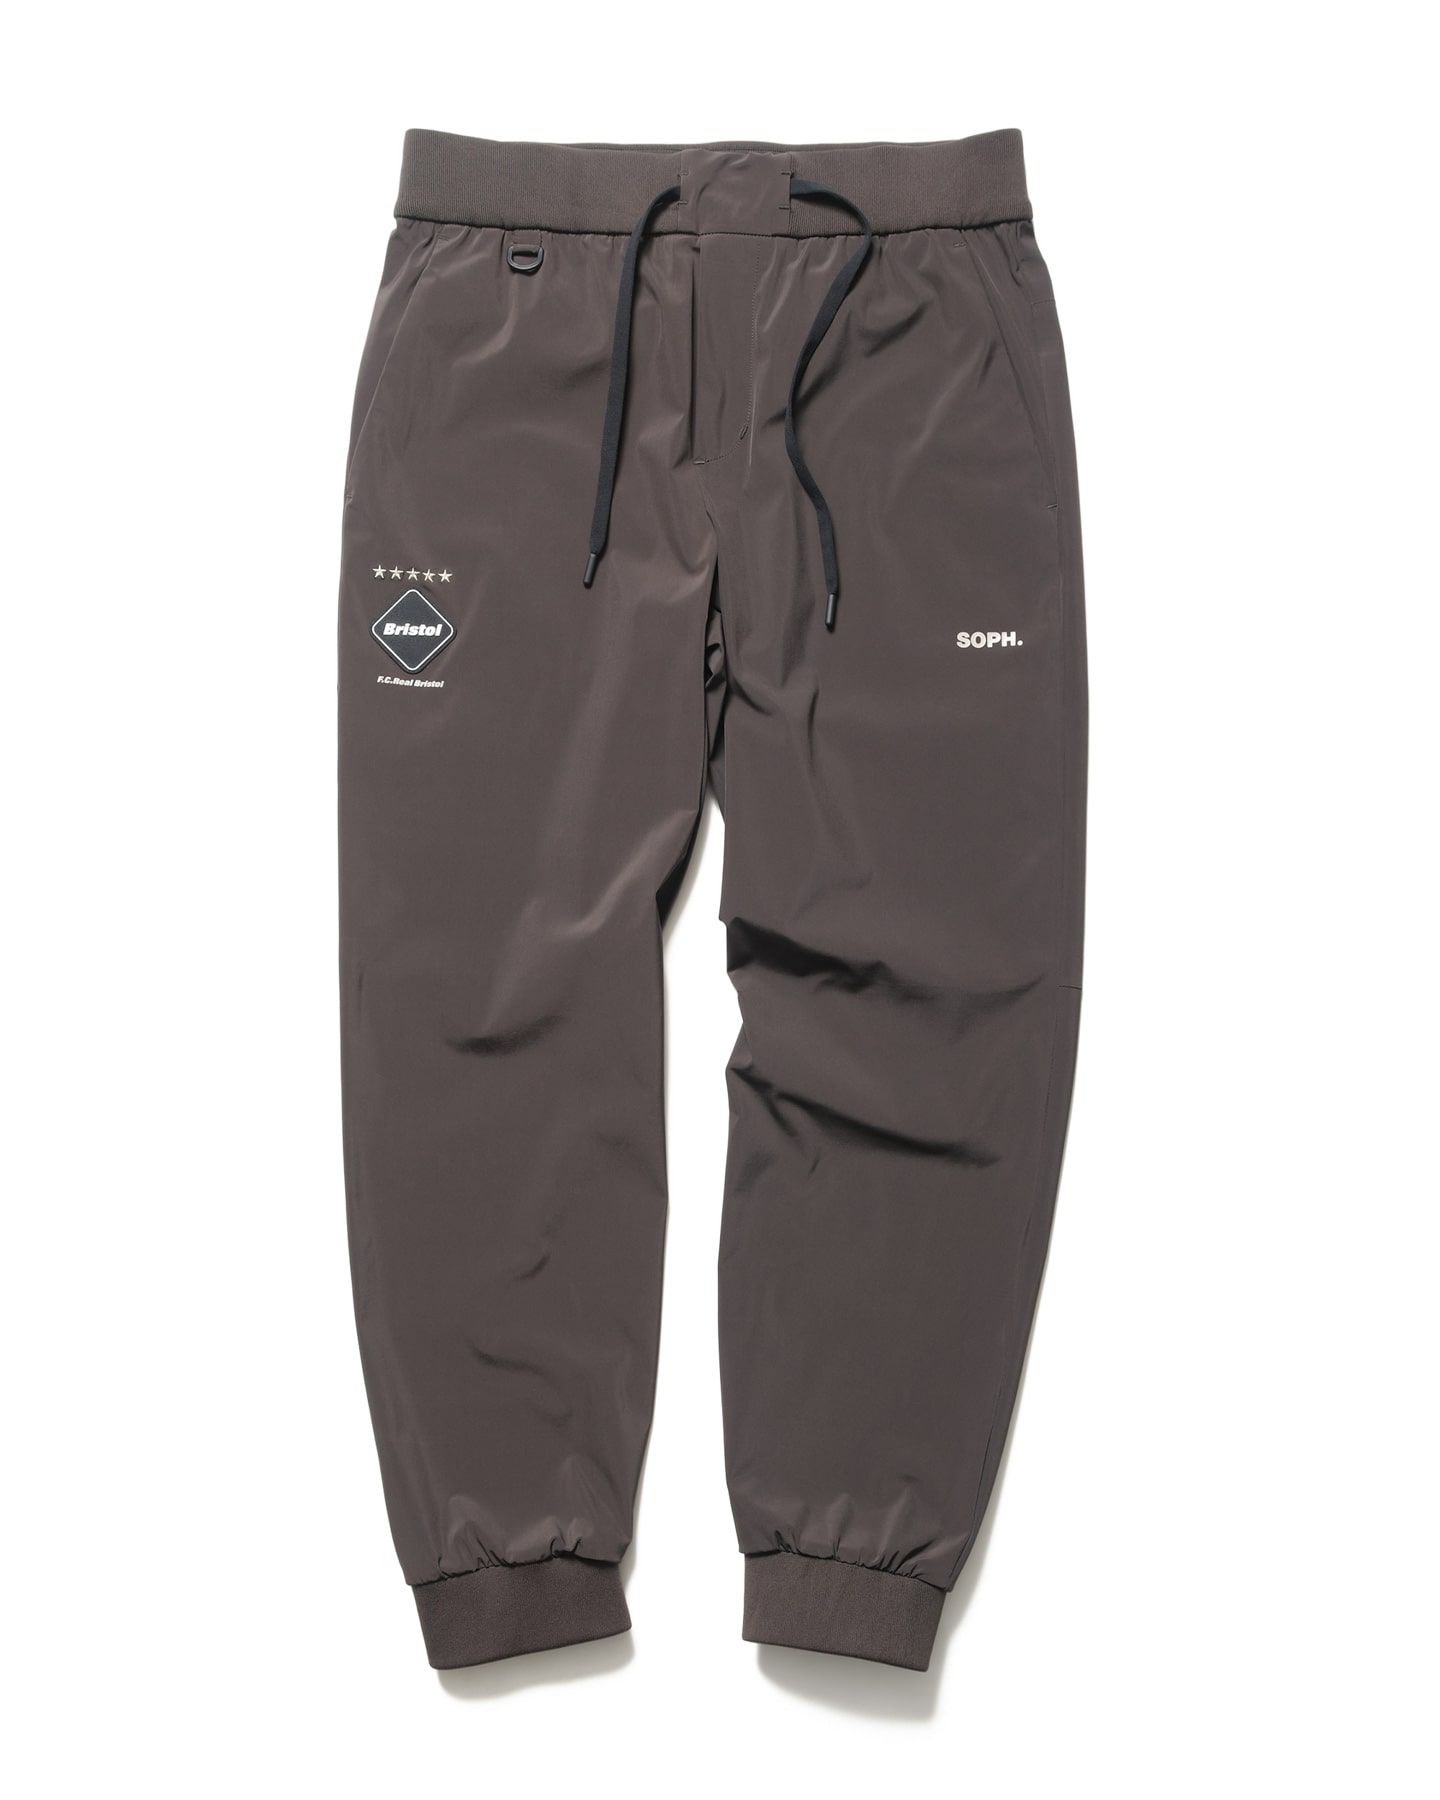 fcrb 4way stretch ribbed pants brown Sブラウンなら購入希望です